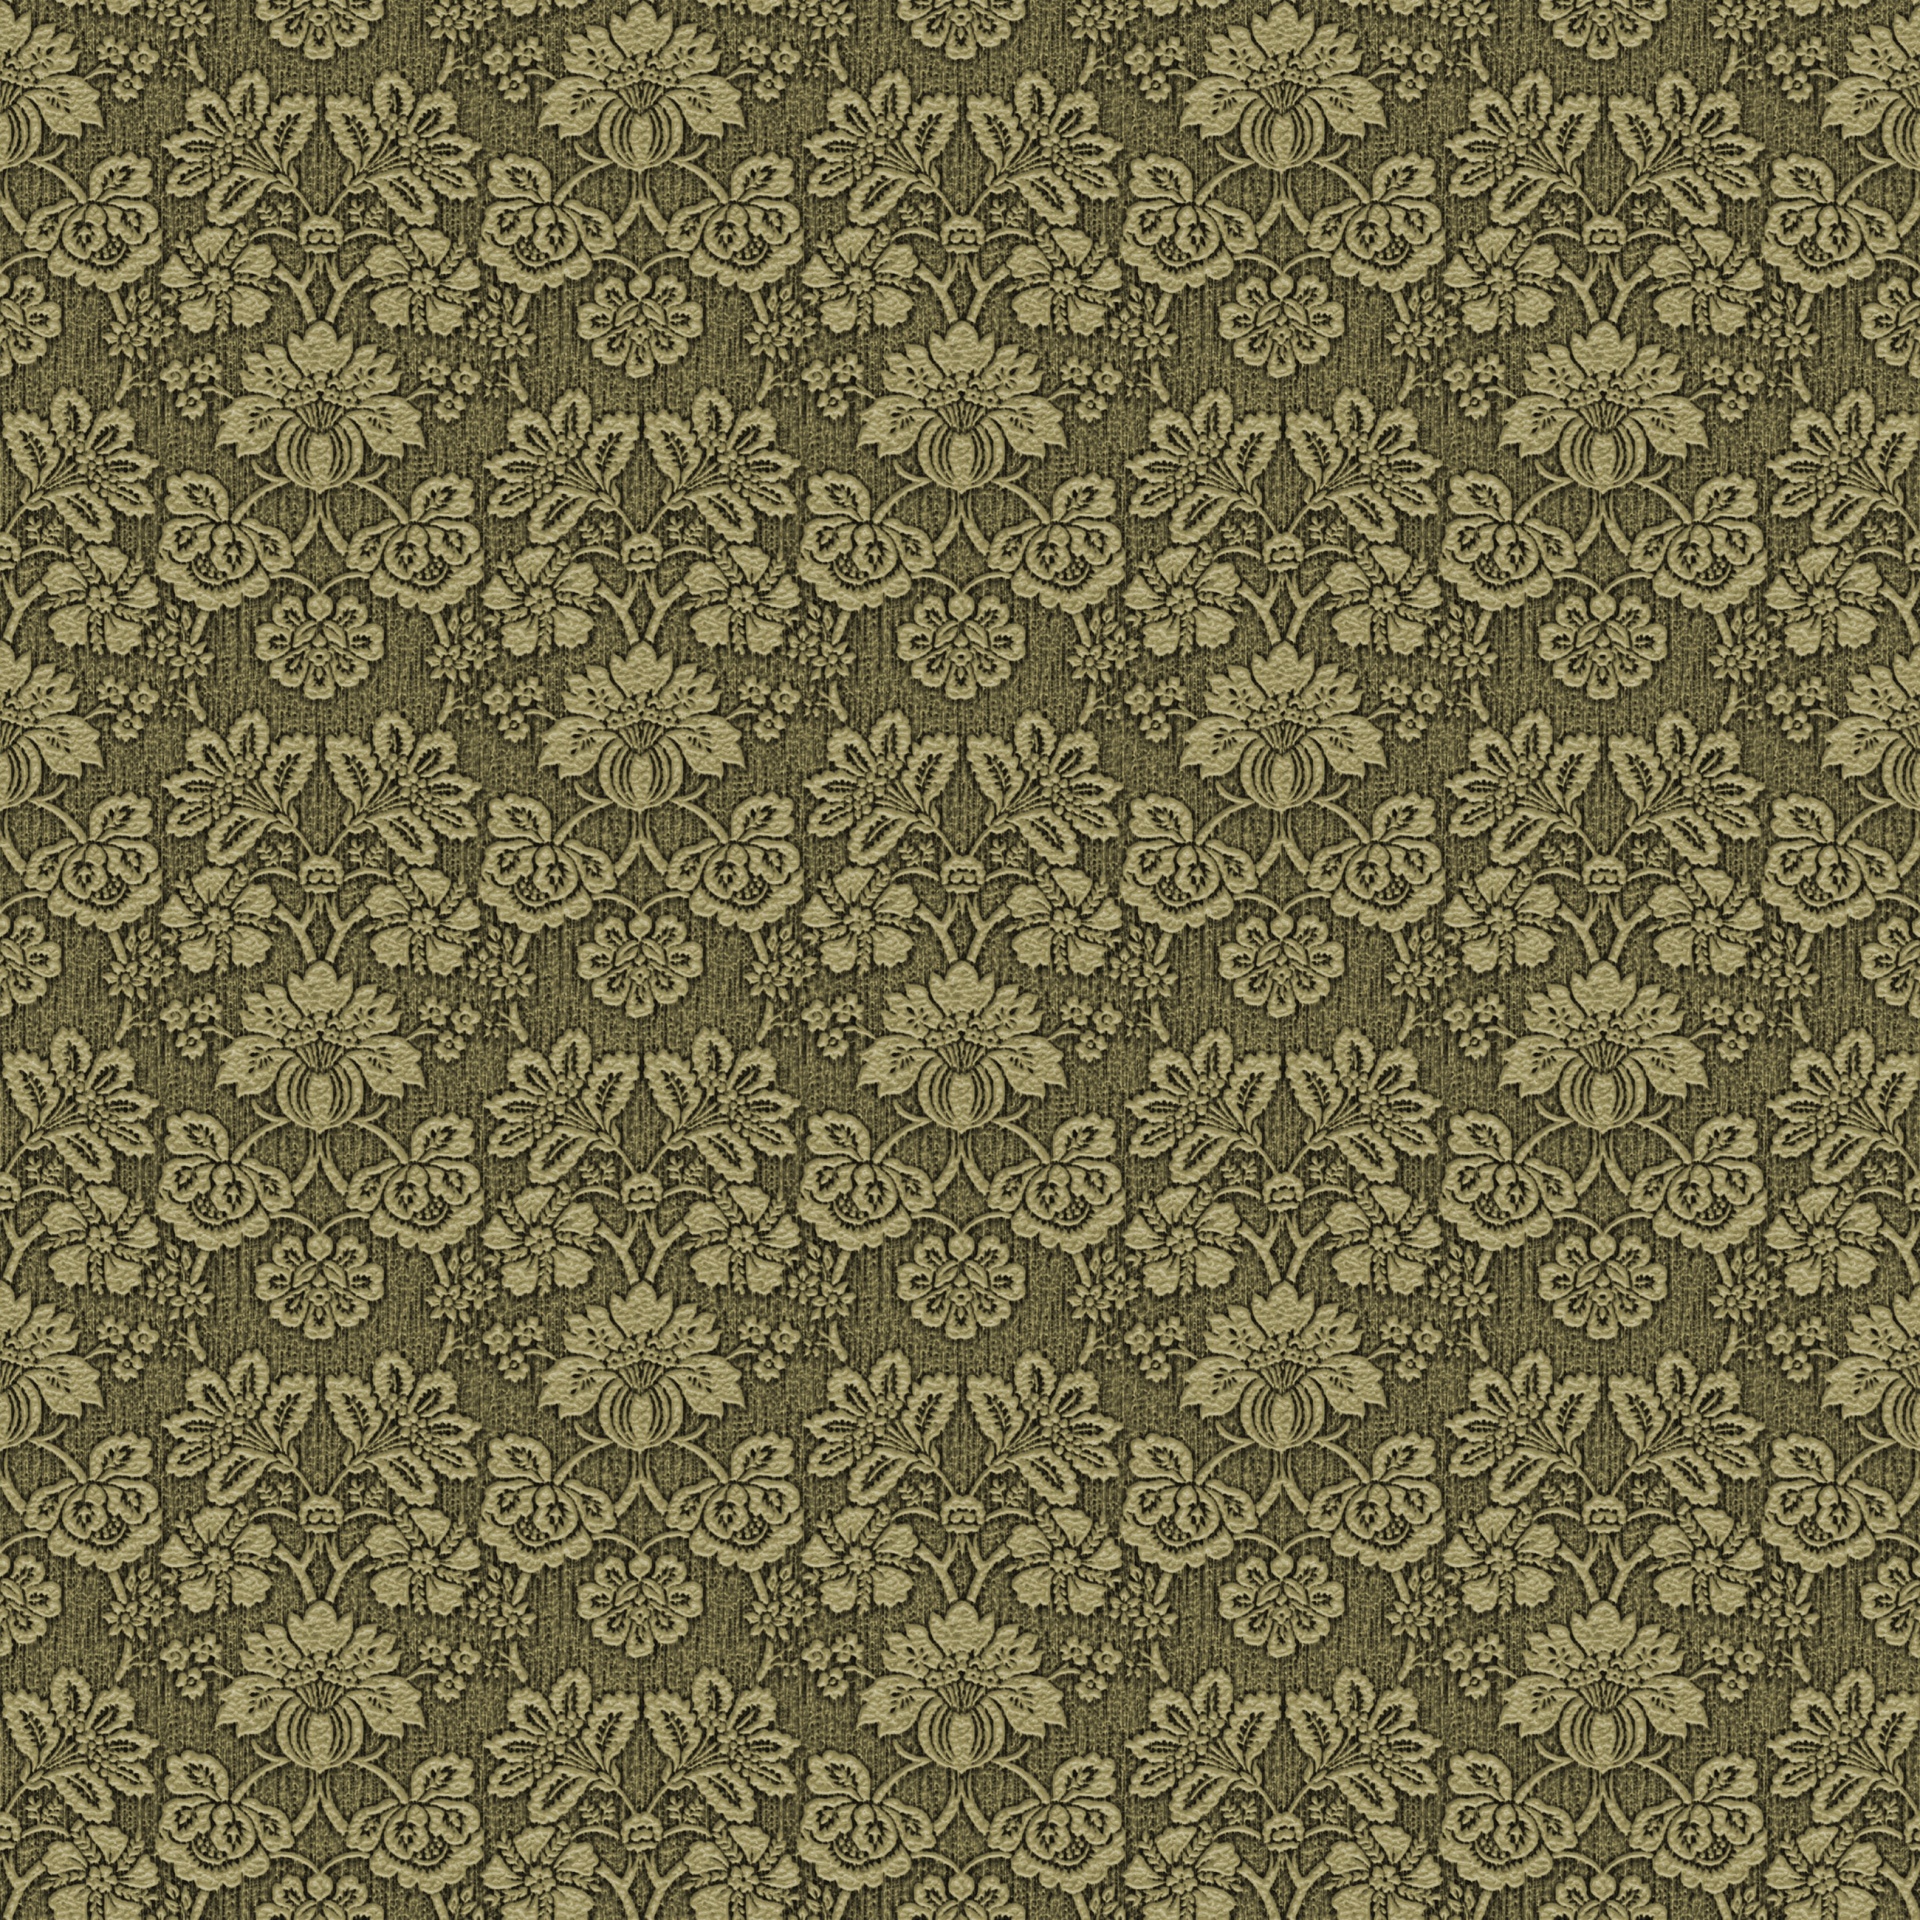 Brown vintage damask pattern seamless wallpaper background with texture